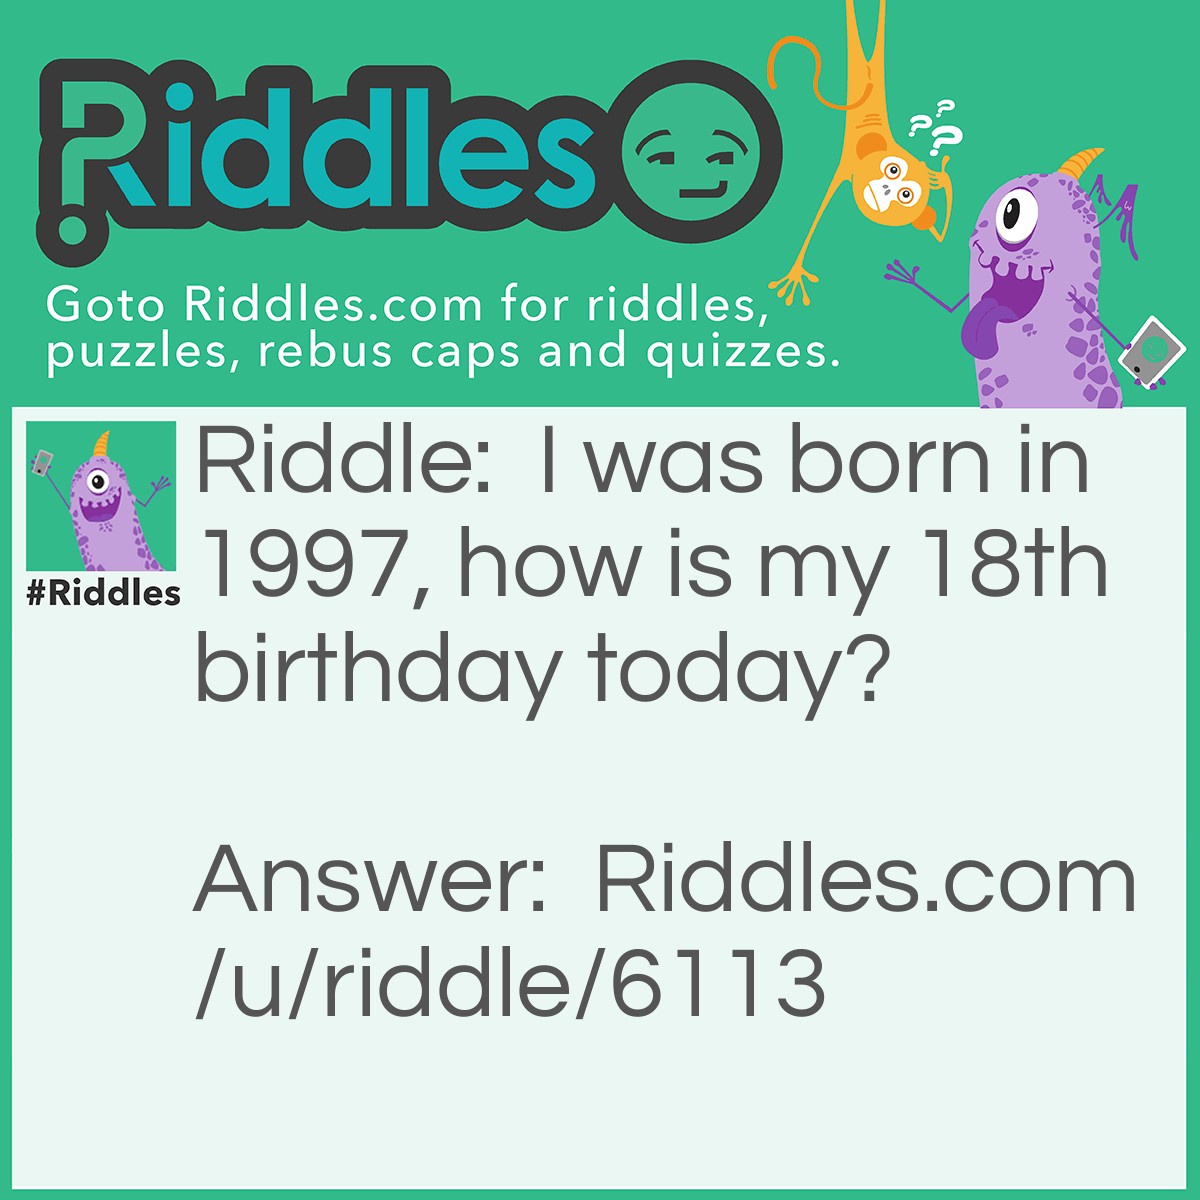 Riddle: I was born in 1997, how is my 18th birthday today? Answer: I was born in the room 1997.